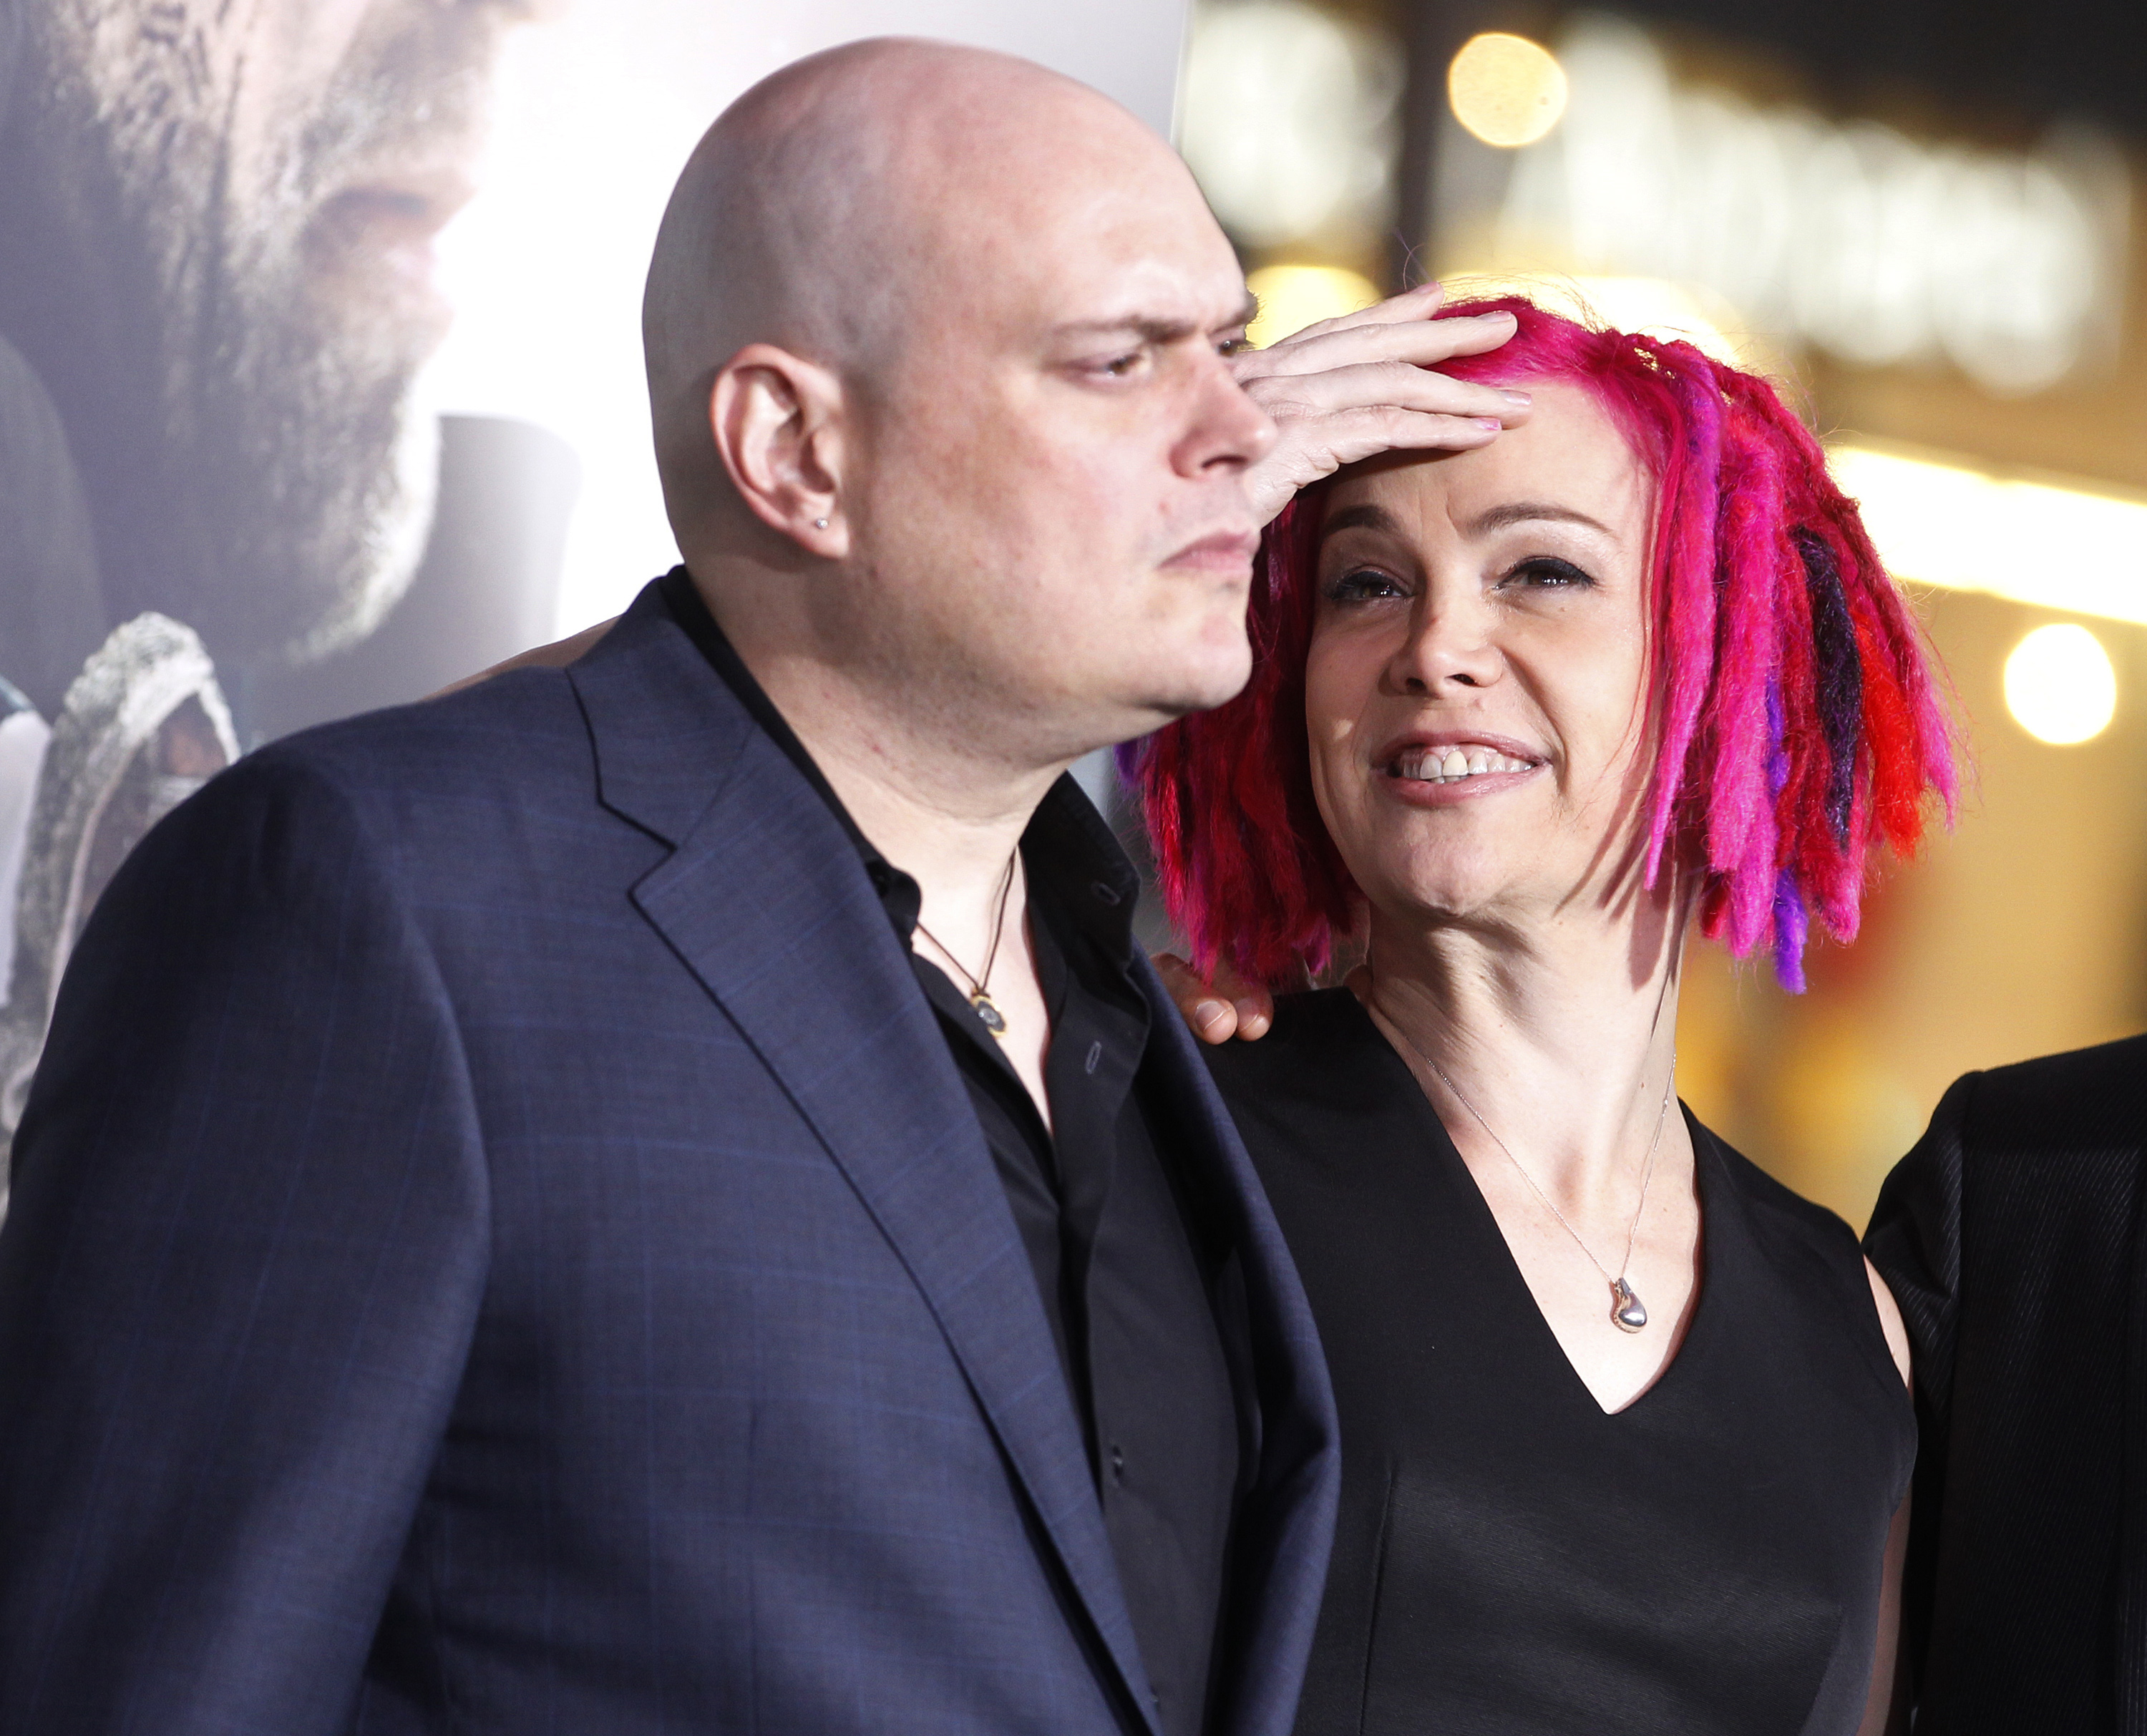 Wachowski's arrive for premiere of new film "Cloud Atlas" in Hollywood